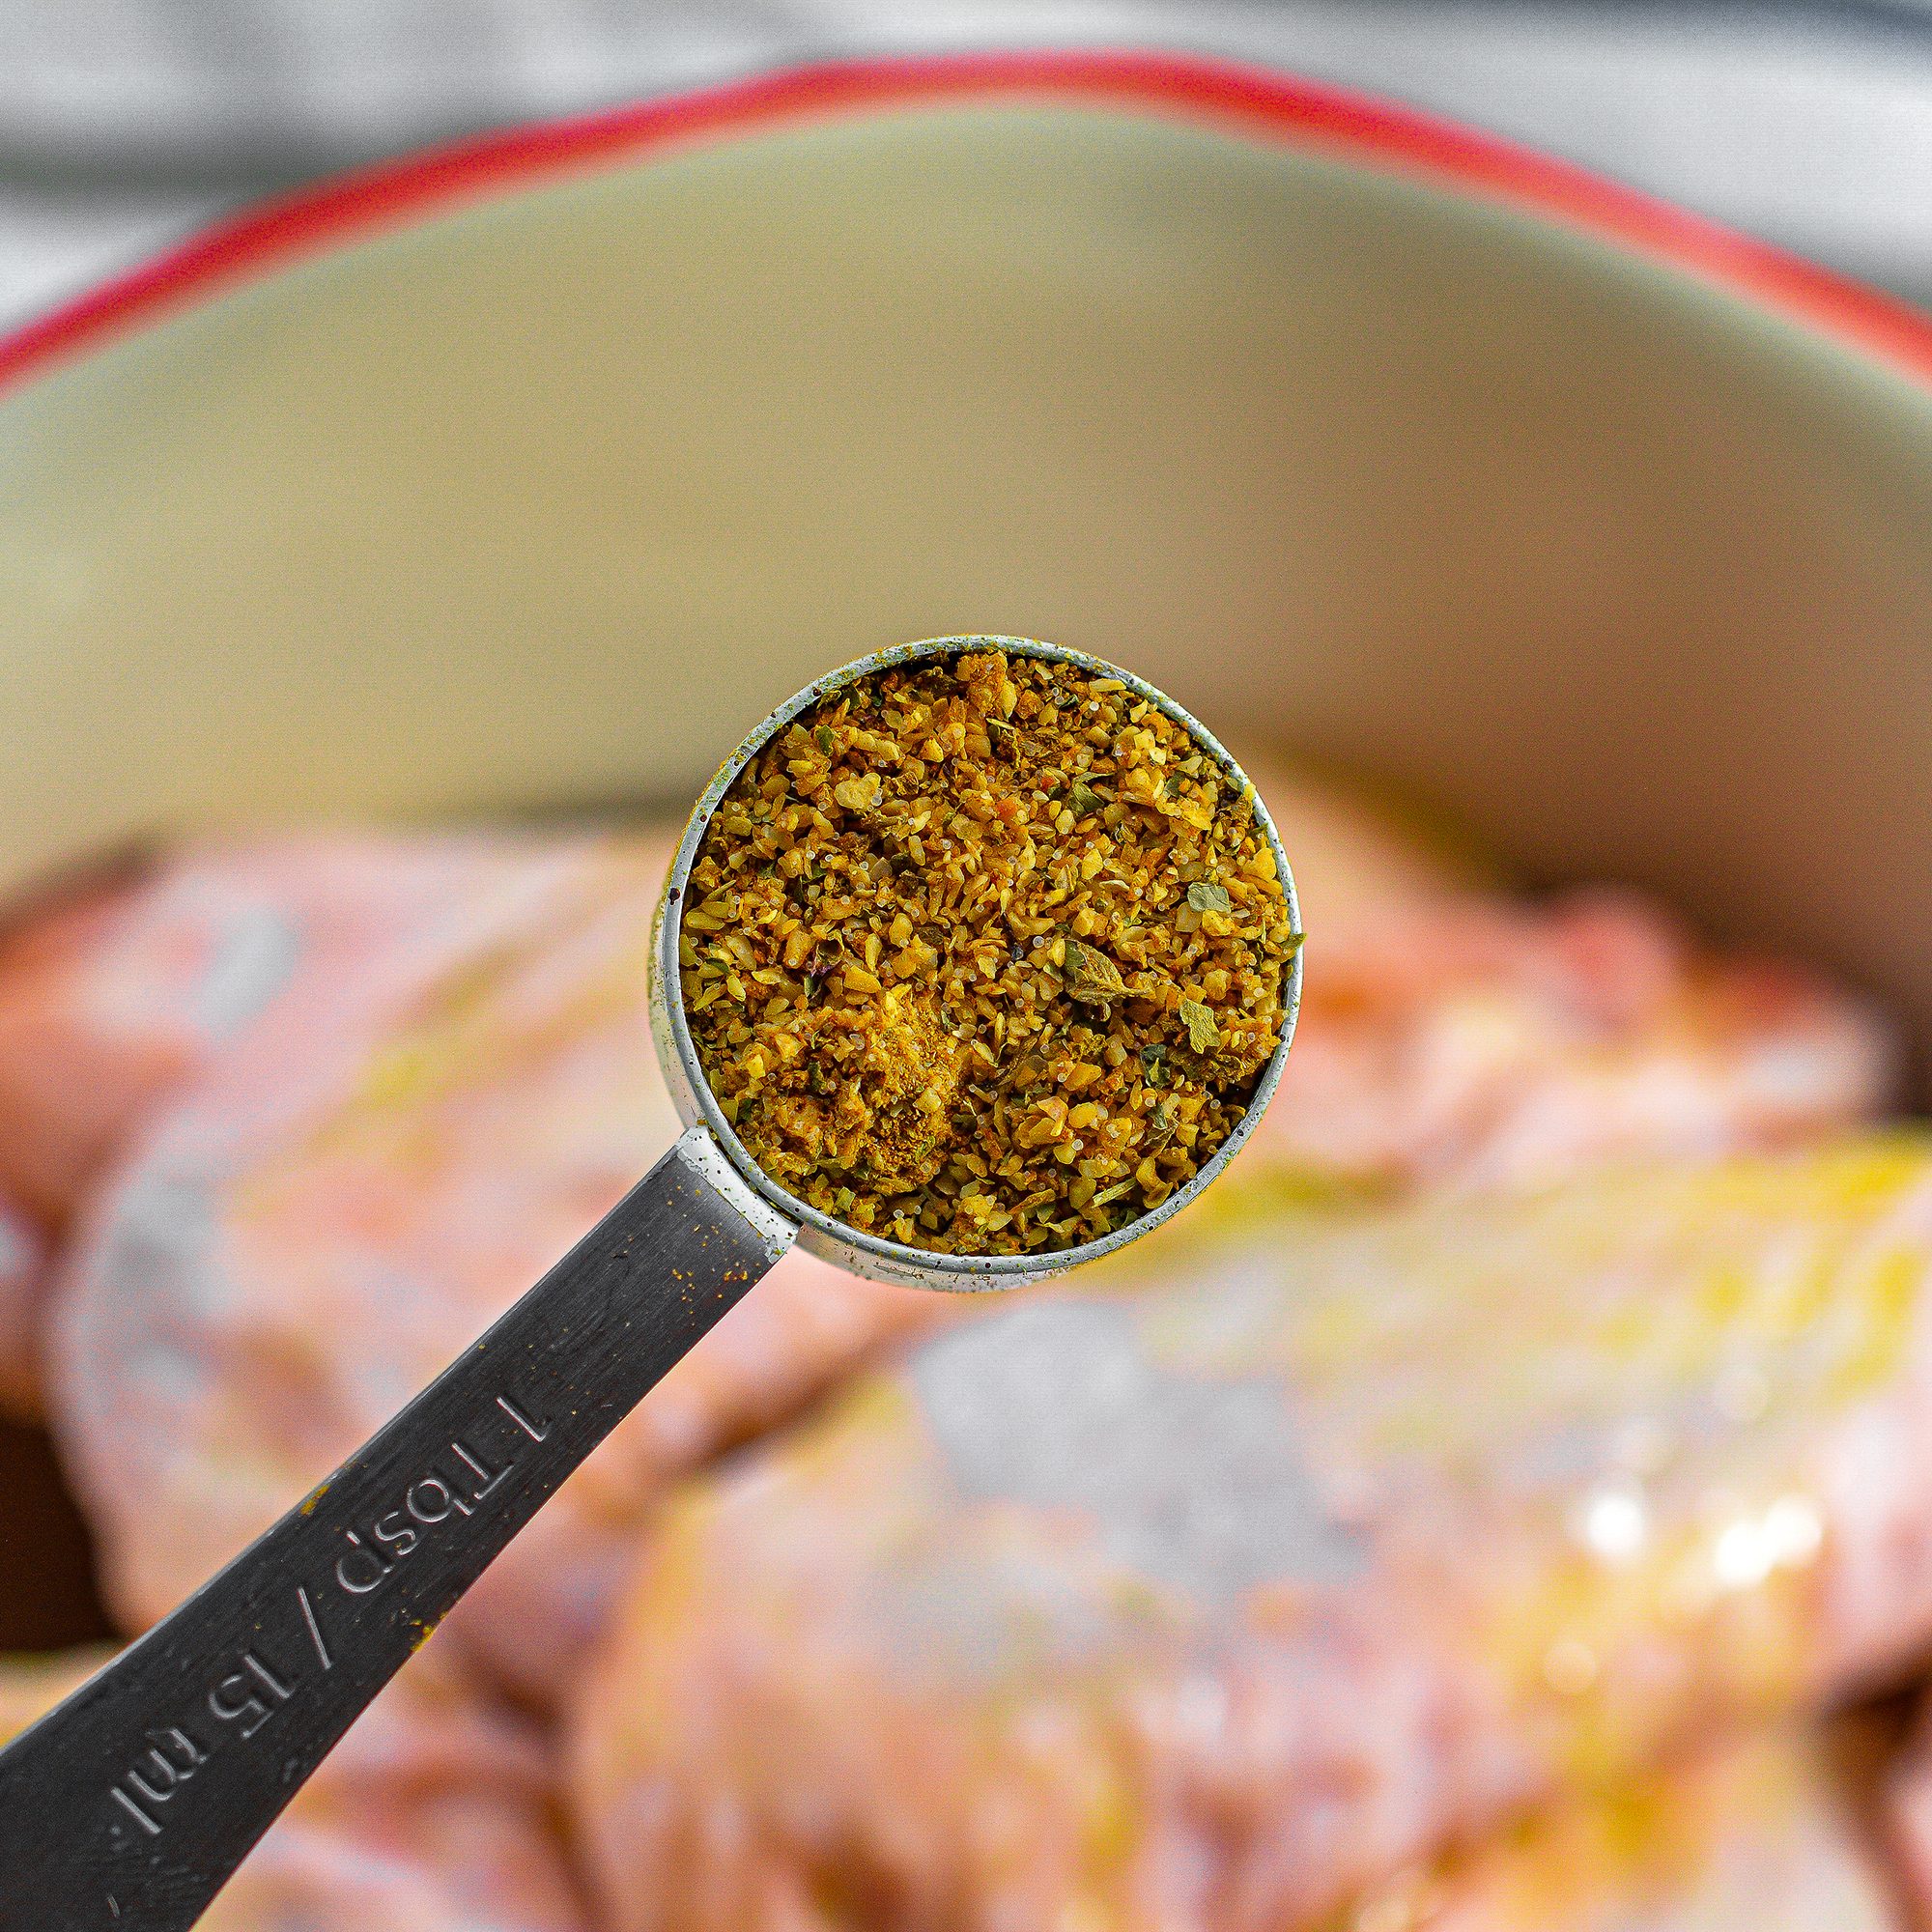 Sprinkle the poultry seasoning, salt and pepper, and mix to combine well.